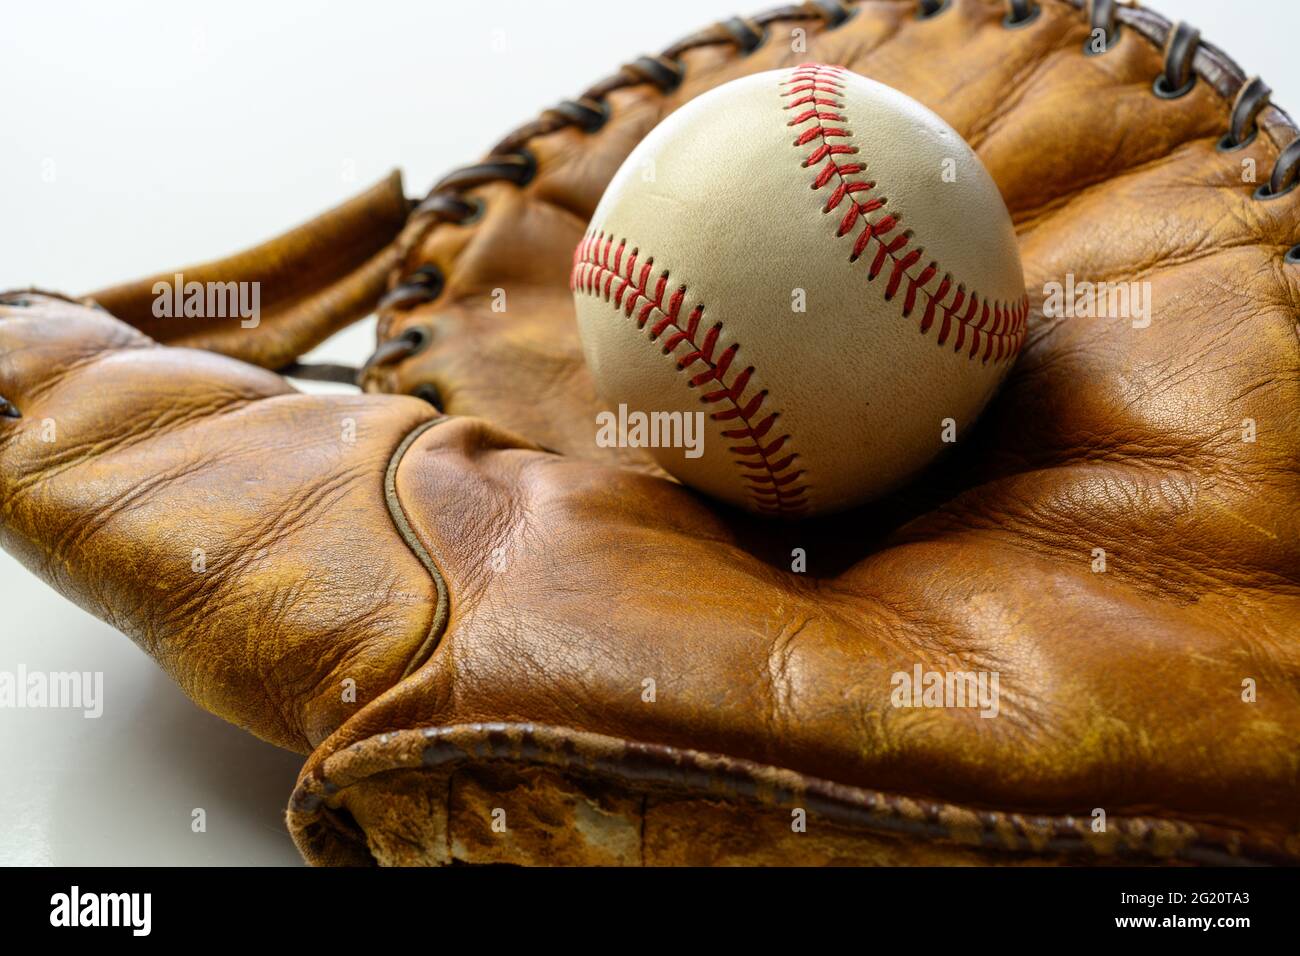 A white leather baseball in a brown vintage, antique glove Stock Photo